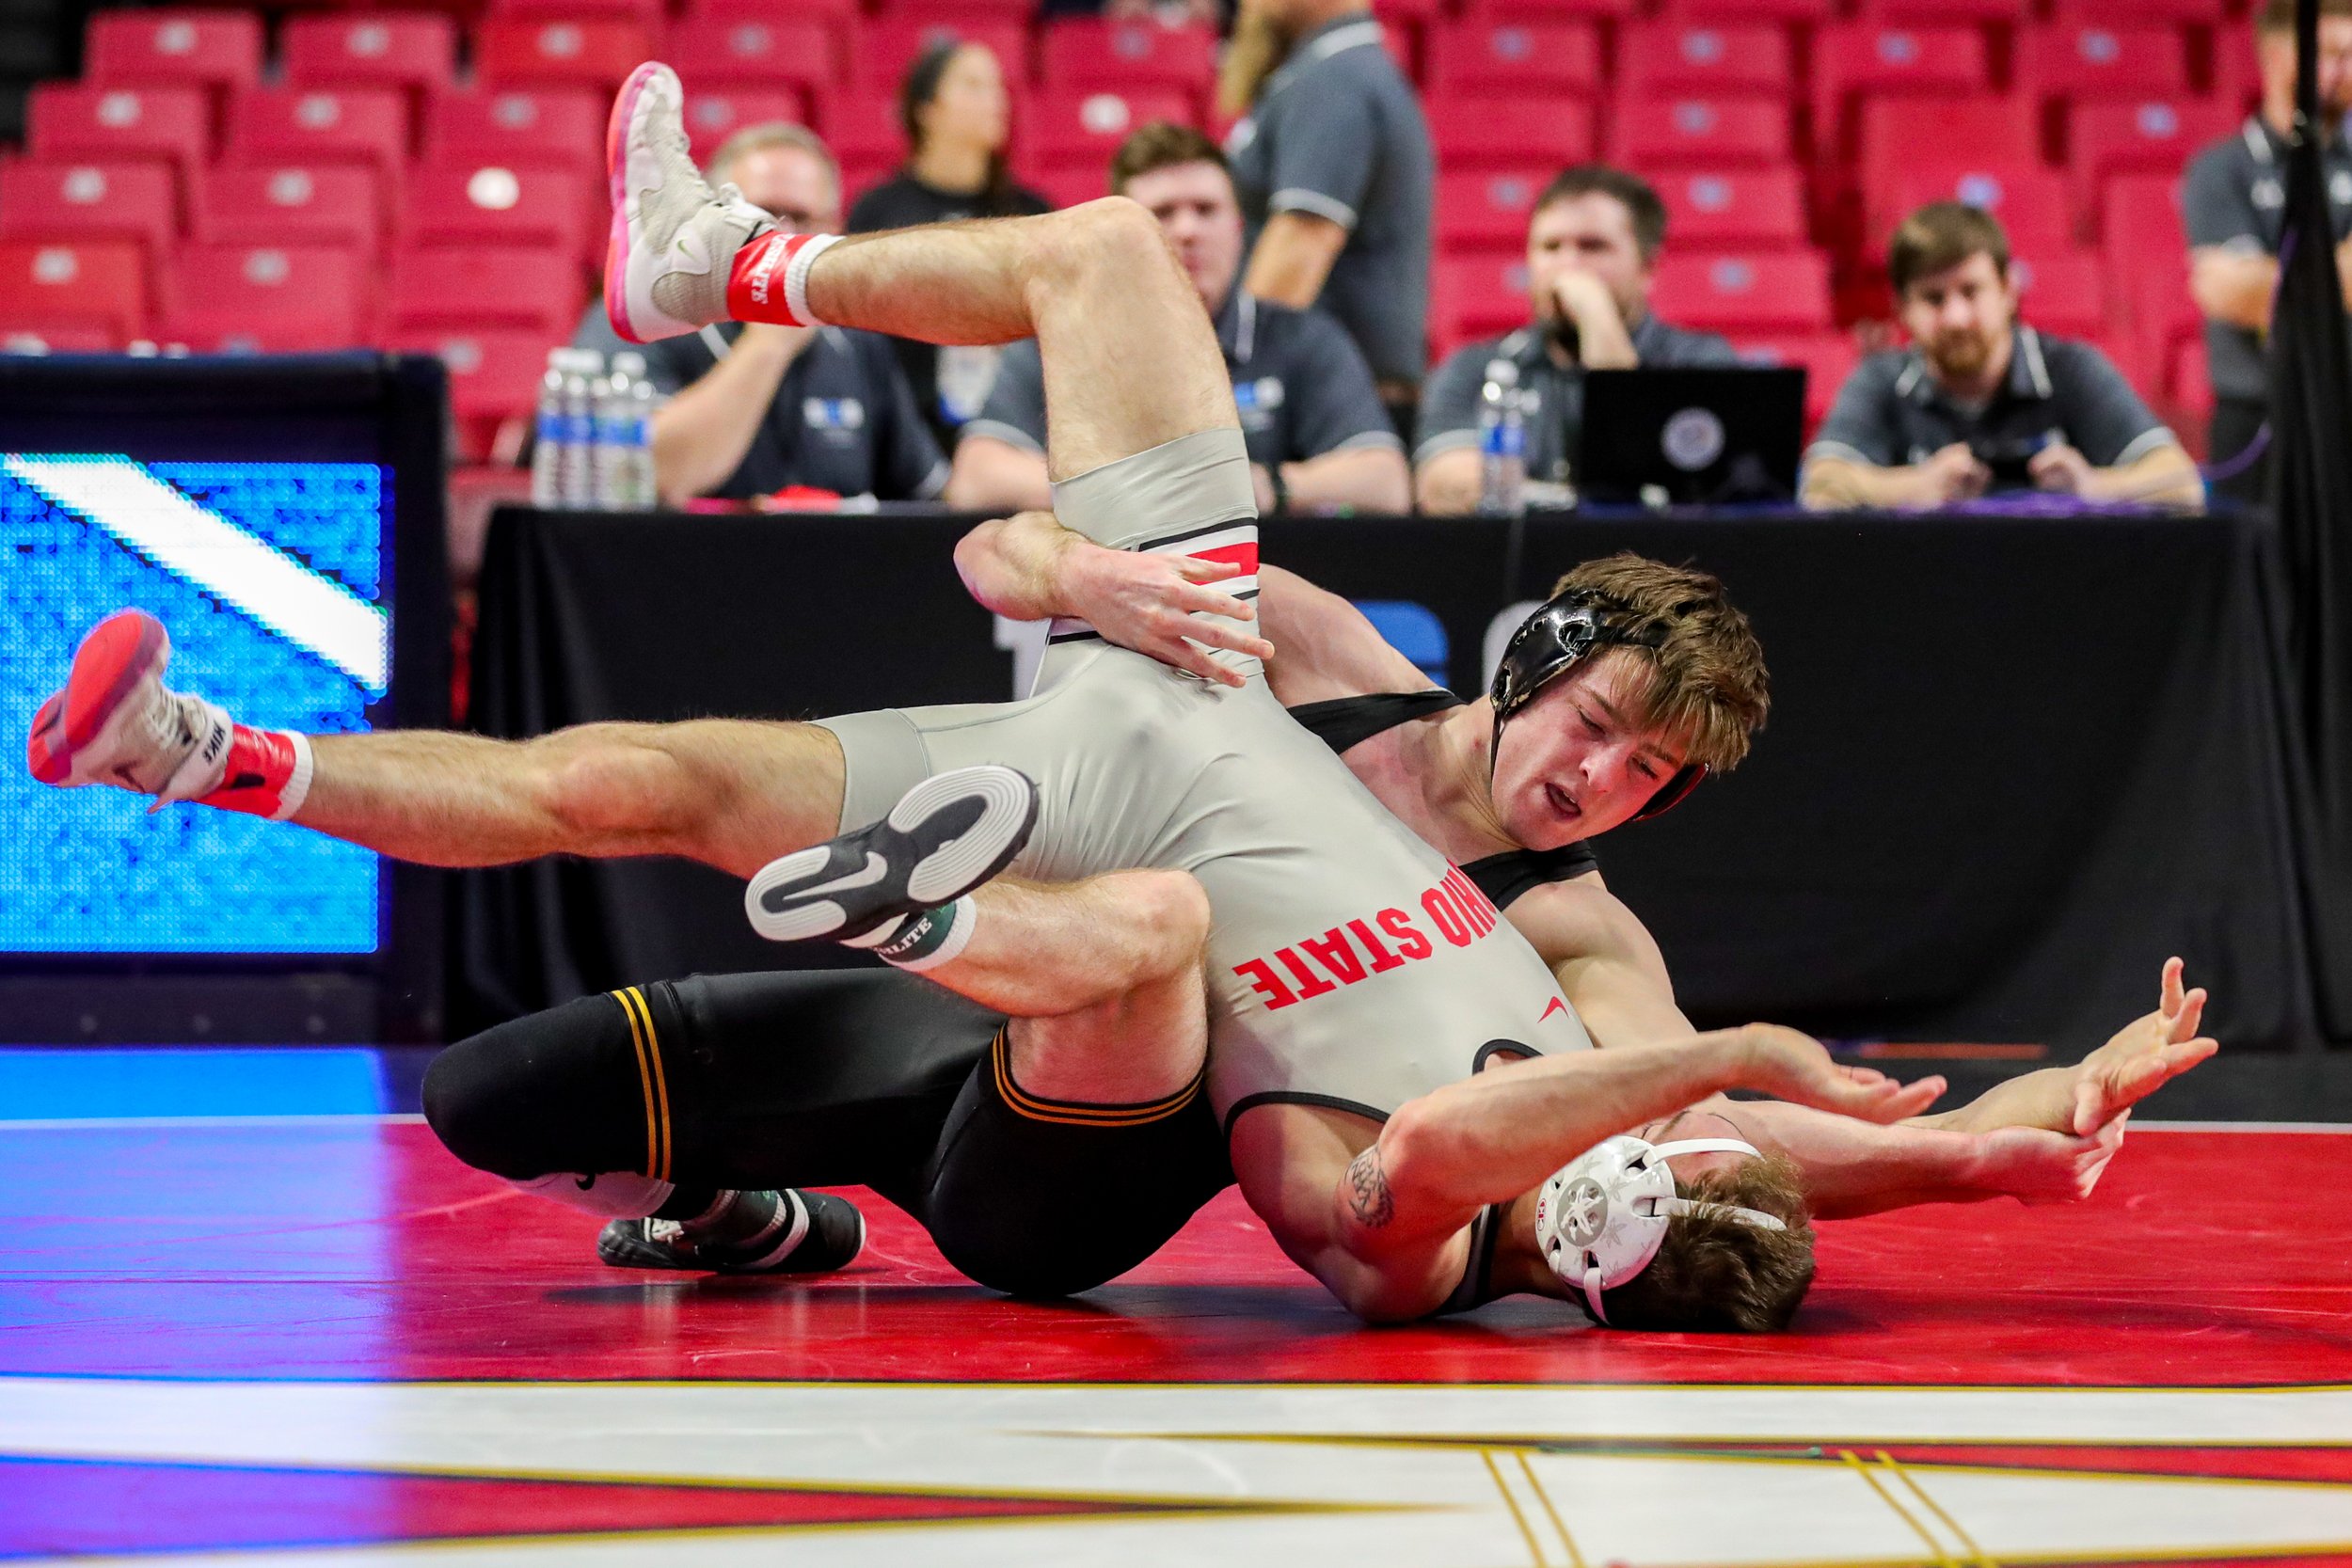  Iowa wrestler Caleb Rathjen grapples with Ohio State’s Dylan D`Emilio in a 149-lb fifth-place match during the Big Ten Wrestling Championships at the Xfinity Center in College Park, Maryland on Sunday, March 10, 2023. Rathien won 11-5. (David Harman